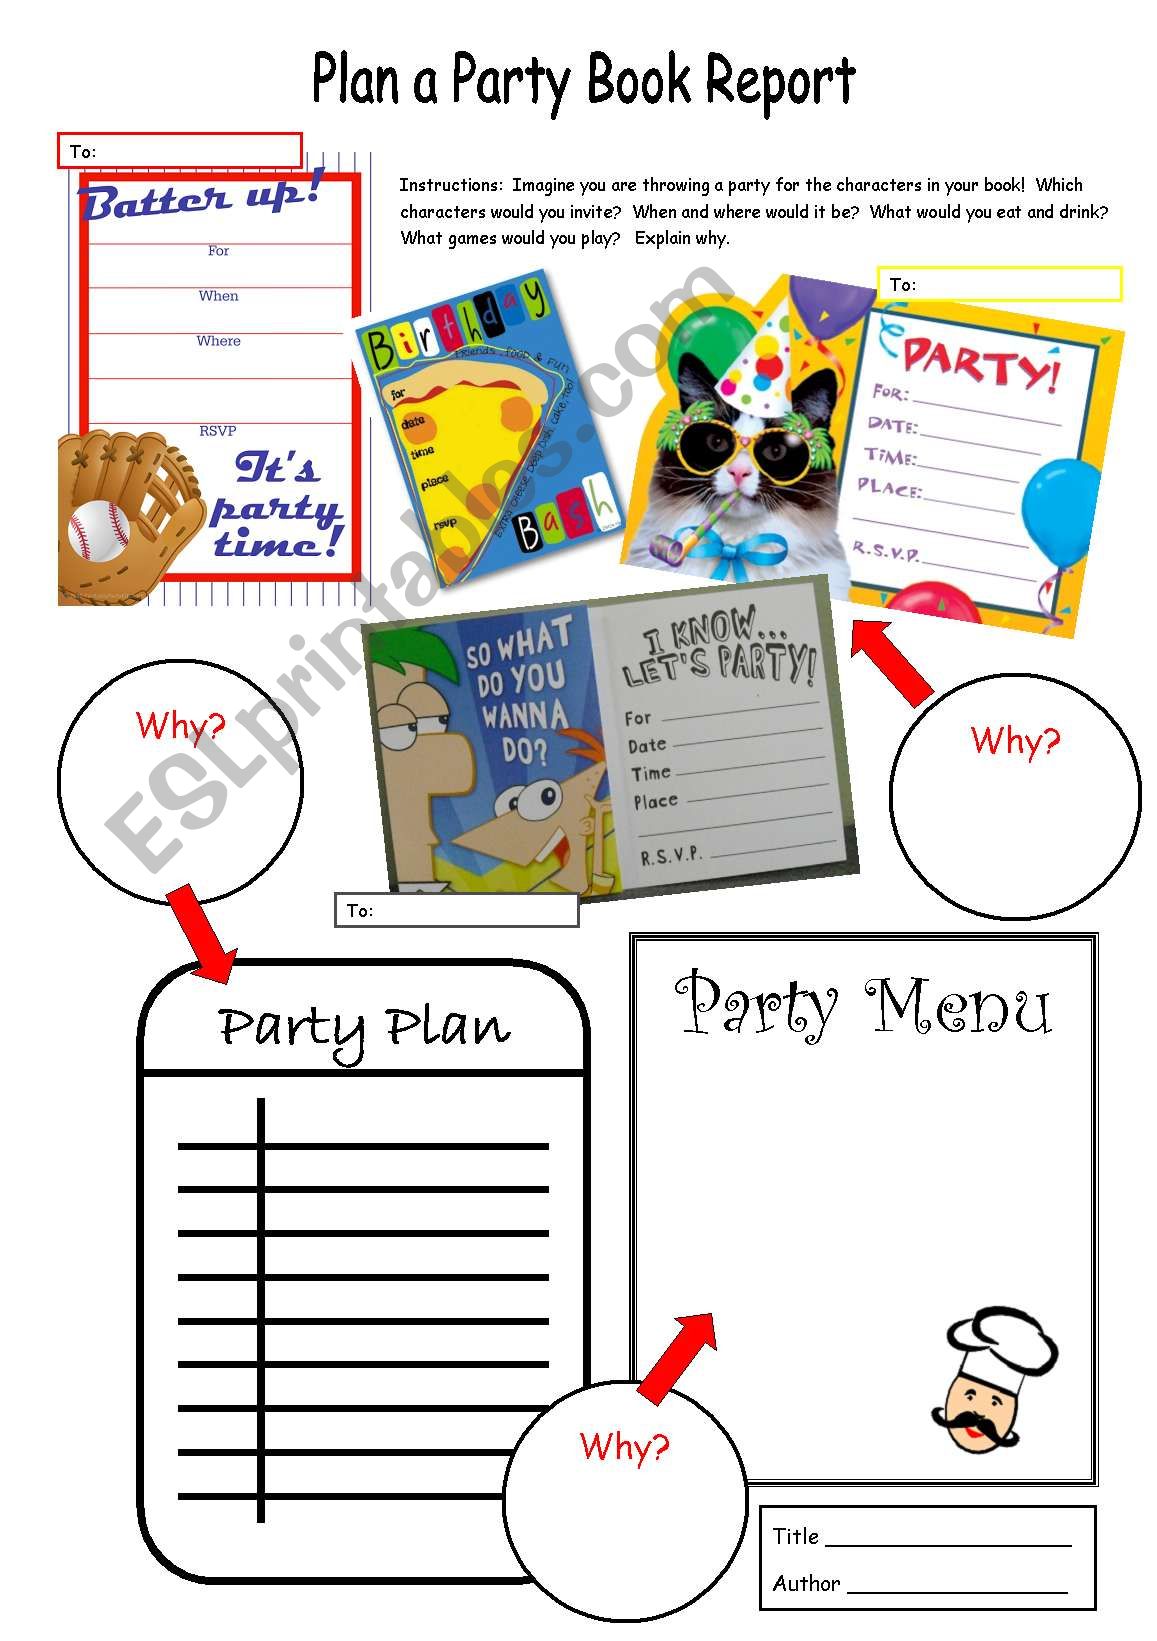 Plan a Party Book Report worksheet